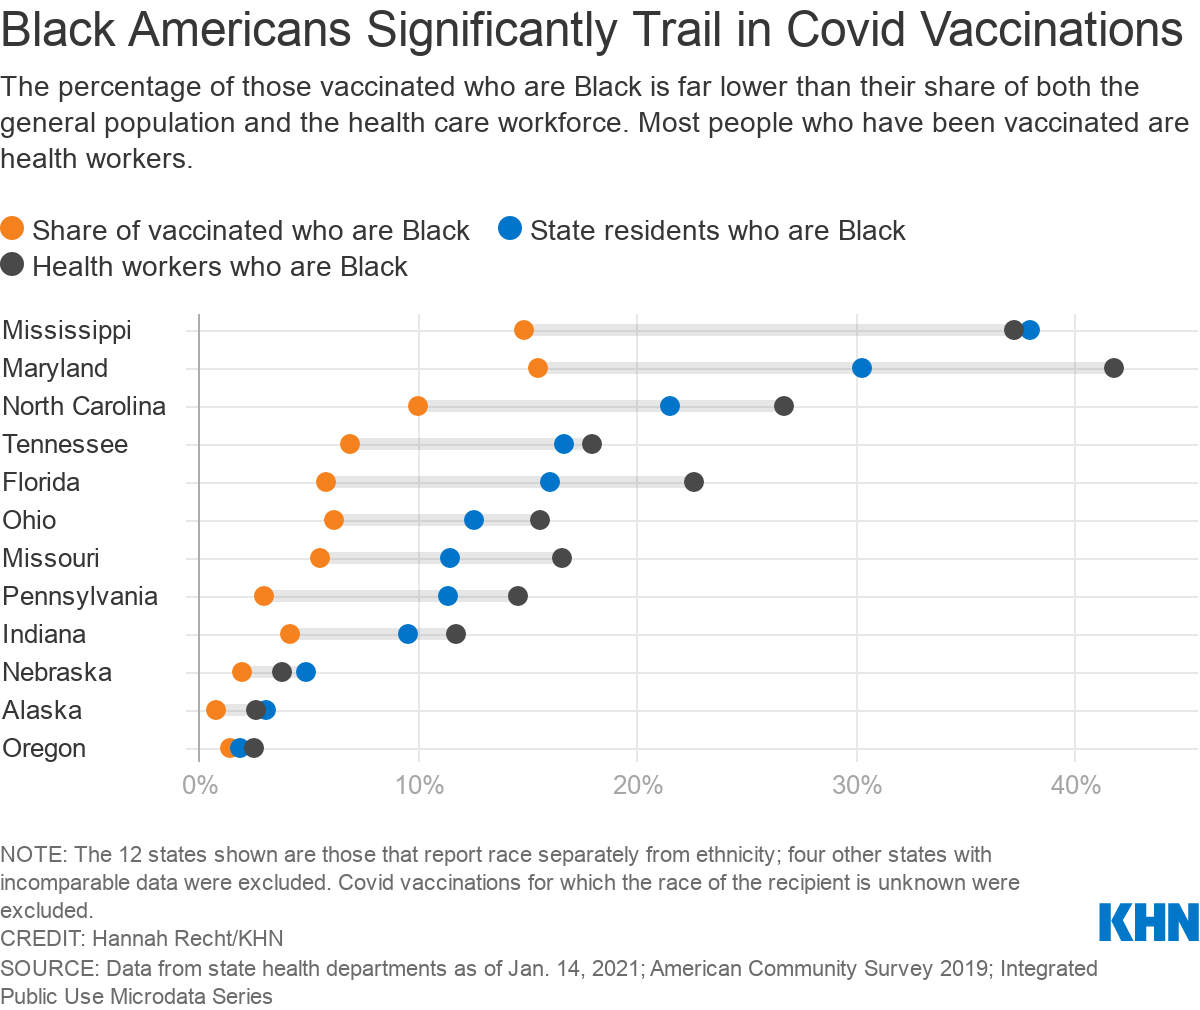 Blacks receiving COVID-19 vaccinations at lower rate